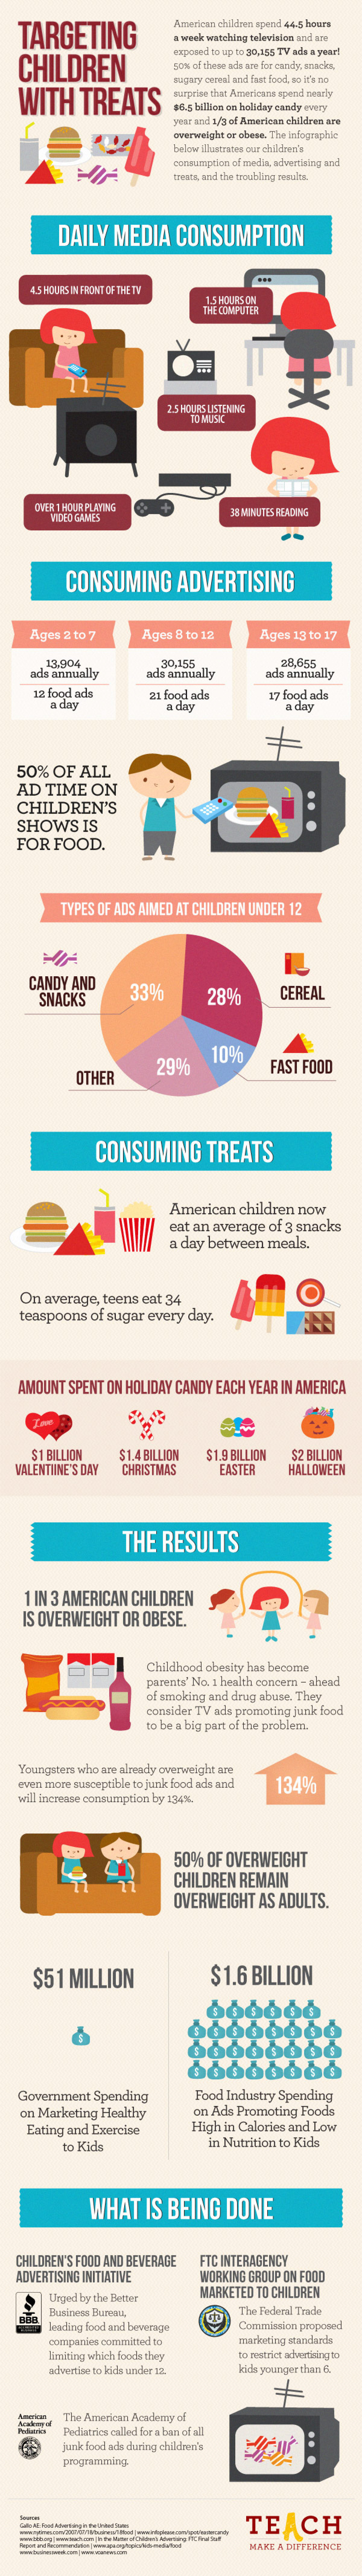 Targeting Children With Treats Infographic